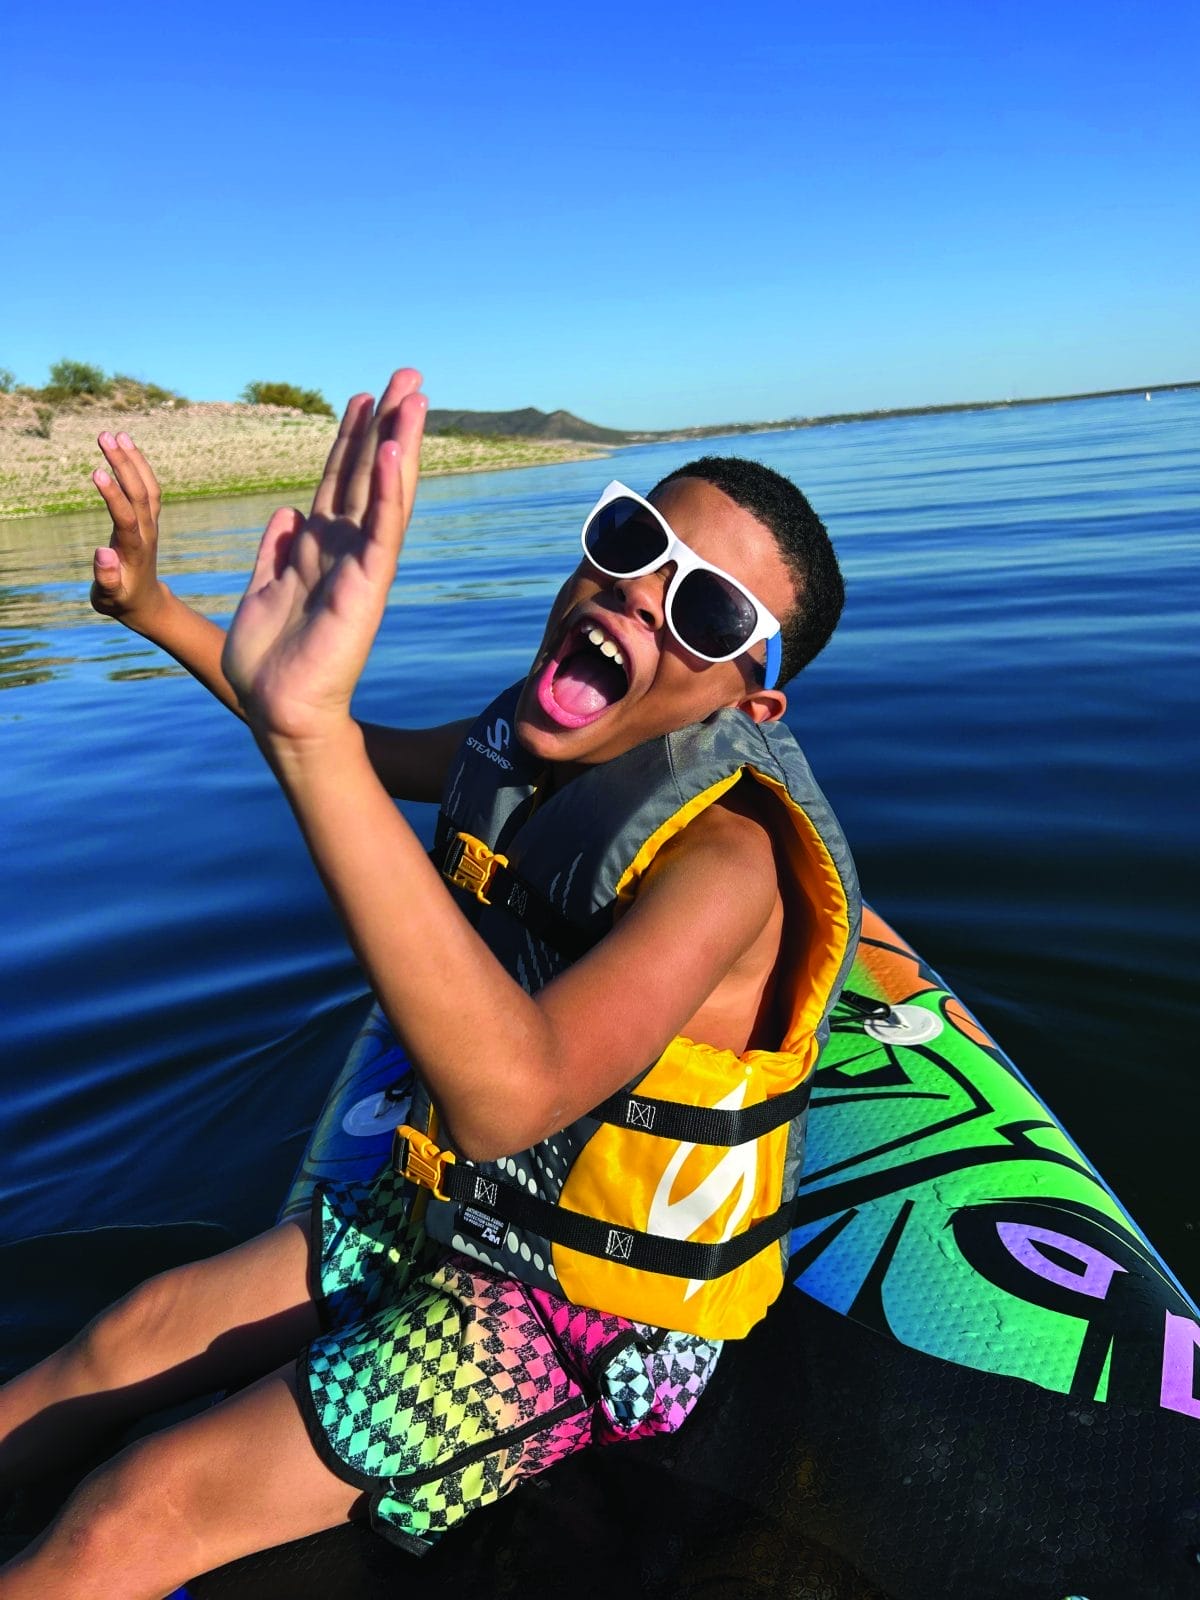 Nico RIdley in a life vest from UCP of Central AZ gives a high-five while sitting on a paddleboard on a lake.